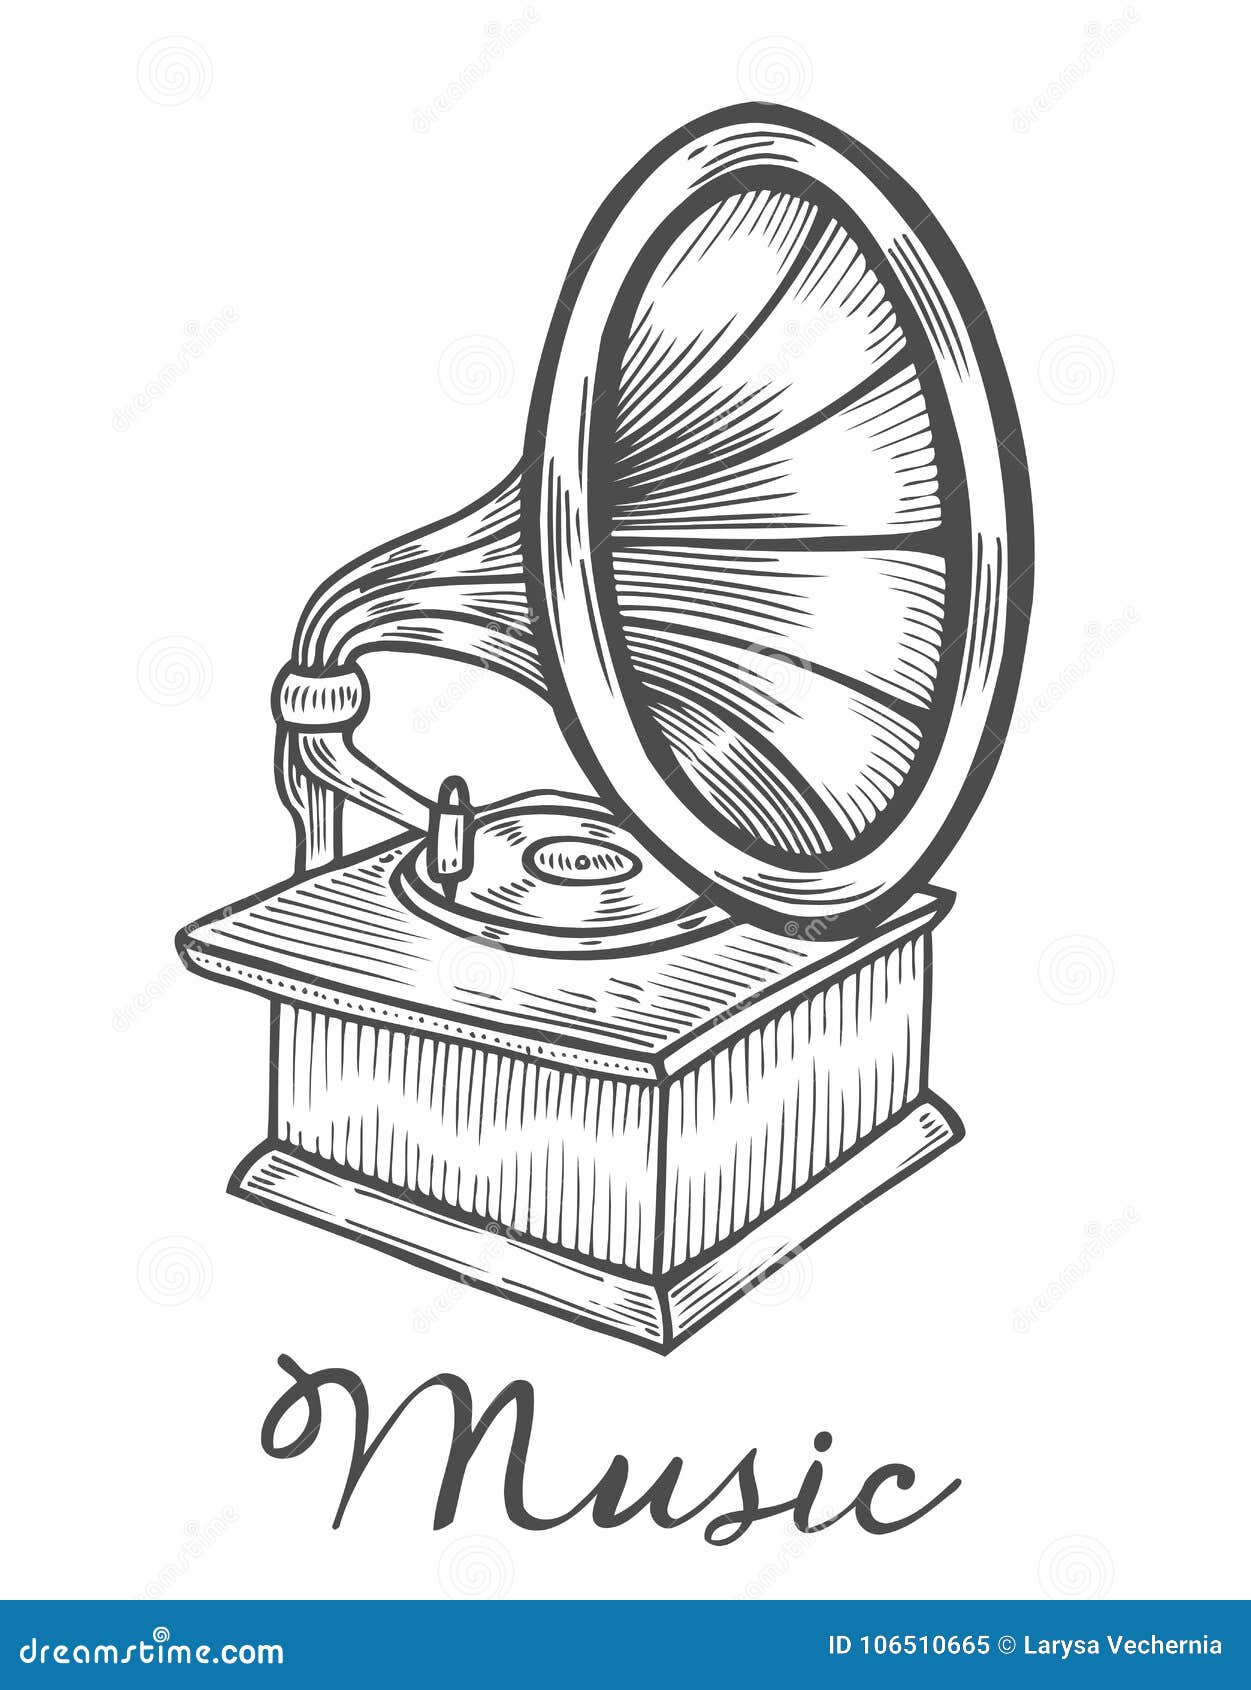 How to Draw a Phonograph  Sketch Drawing of a Gramophone  YouTube